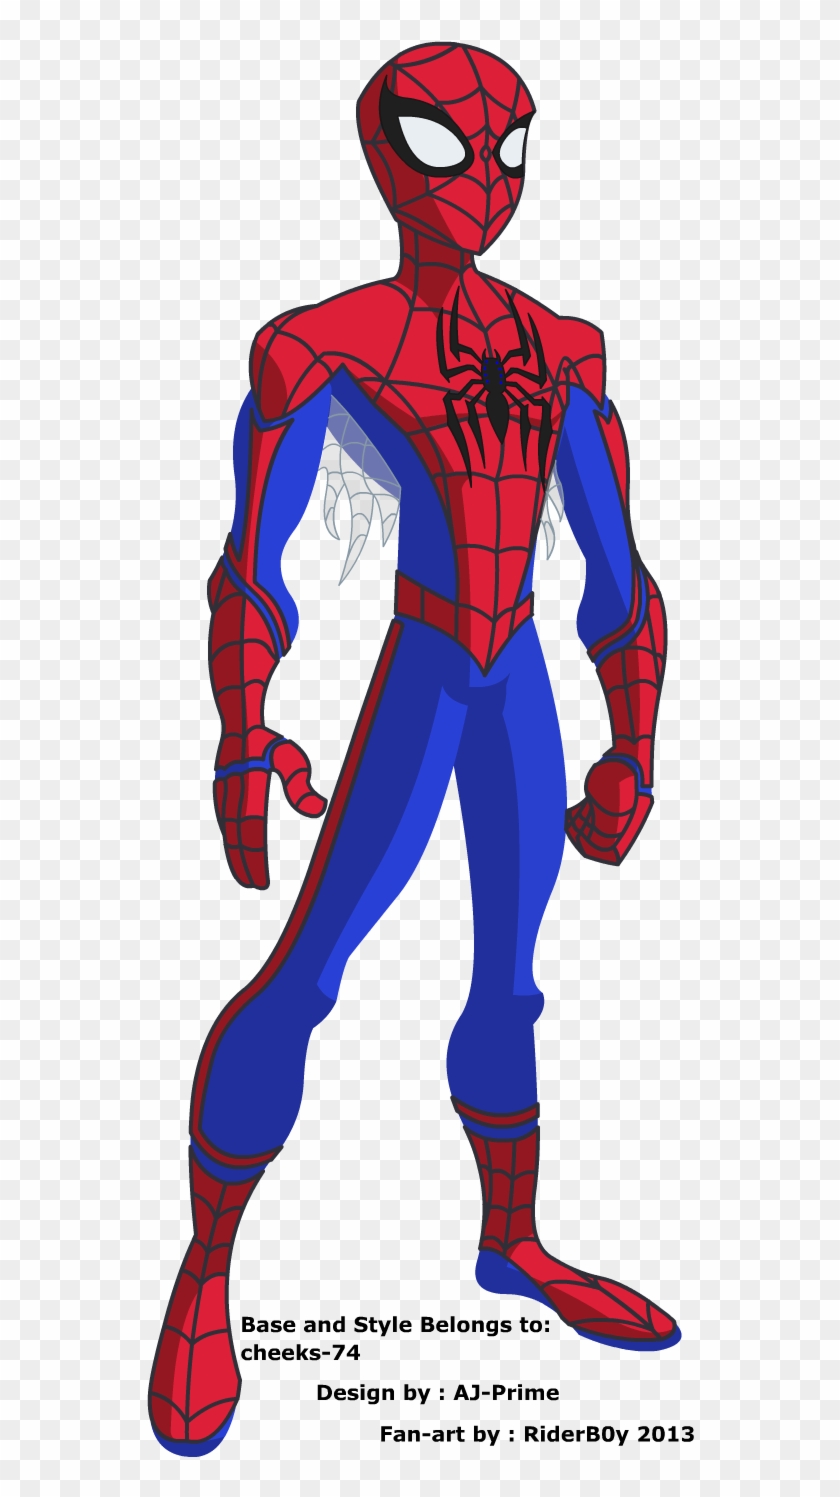 Preview How To Draw Spider Man Upgrade Suit Spider Ma - vrogue.co